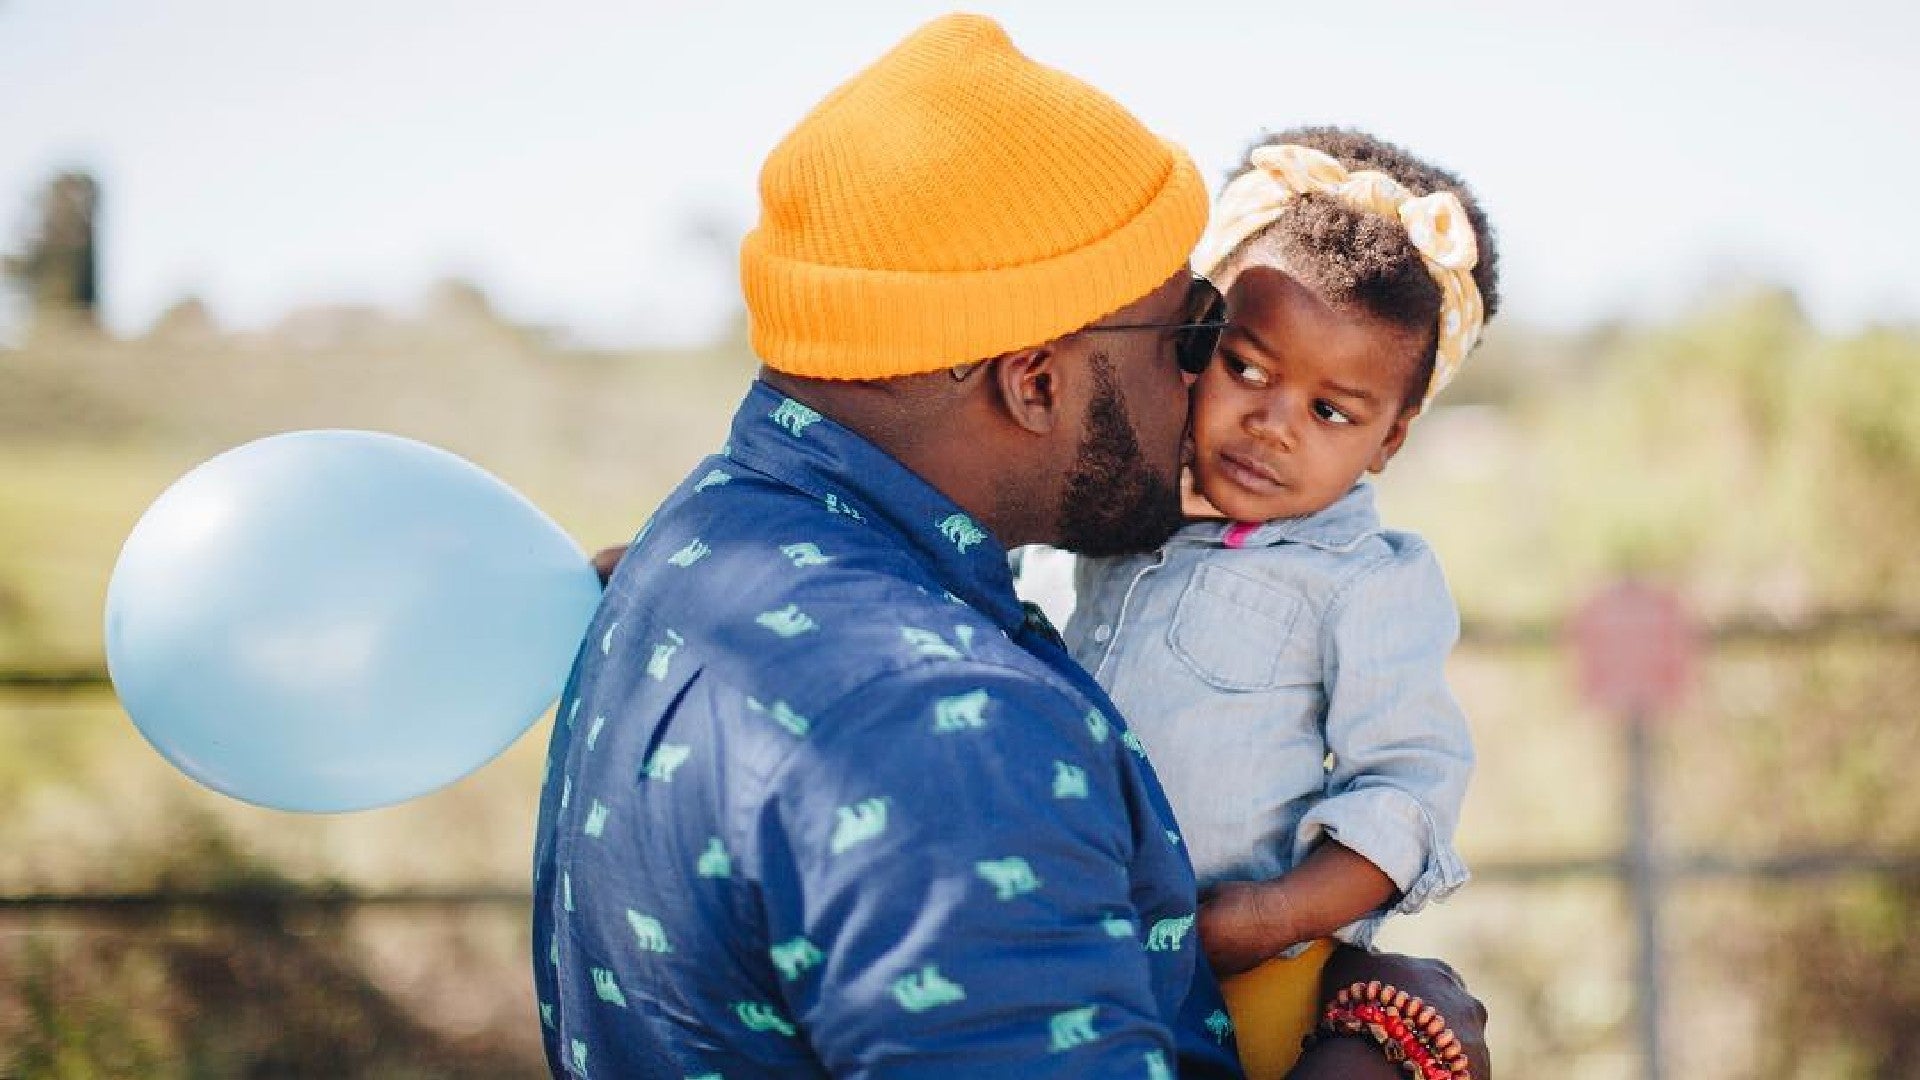 What I Double-Tapped This Weekend: This Cute Daddy-Daughter Head Wrap Moment